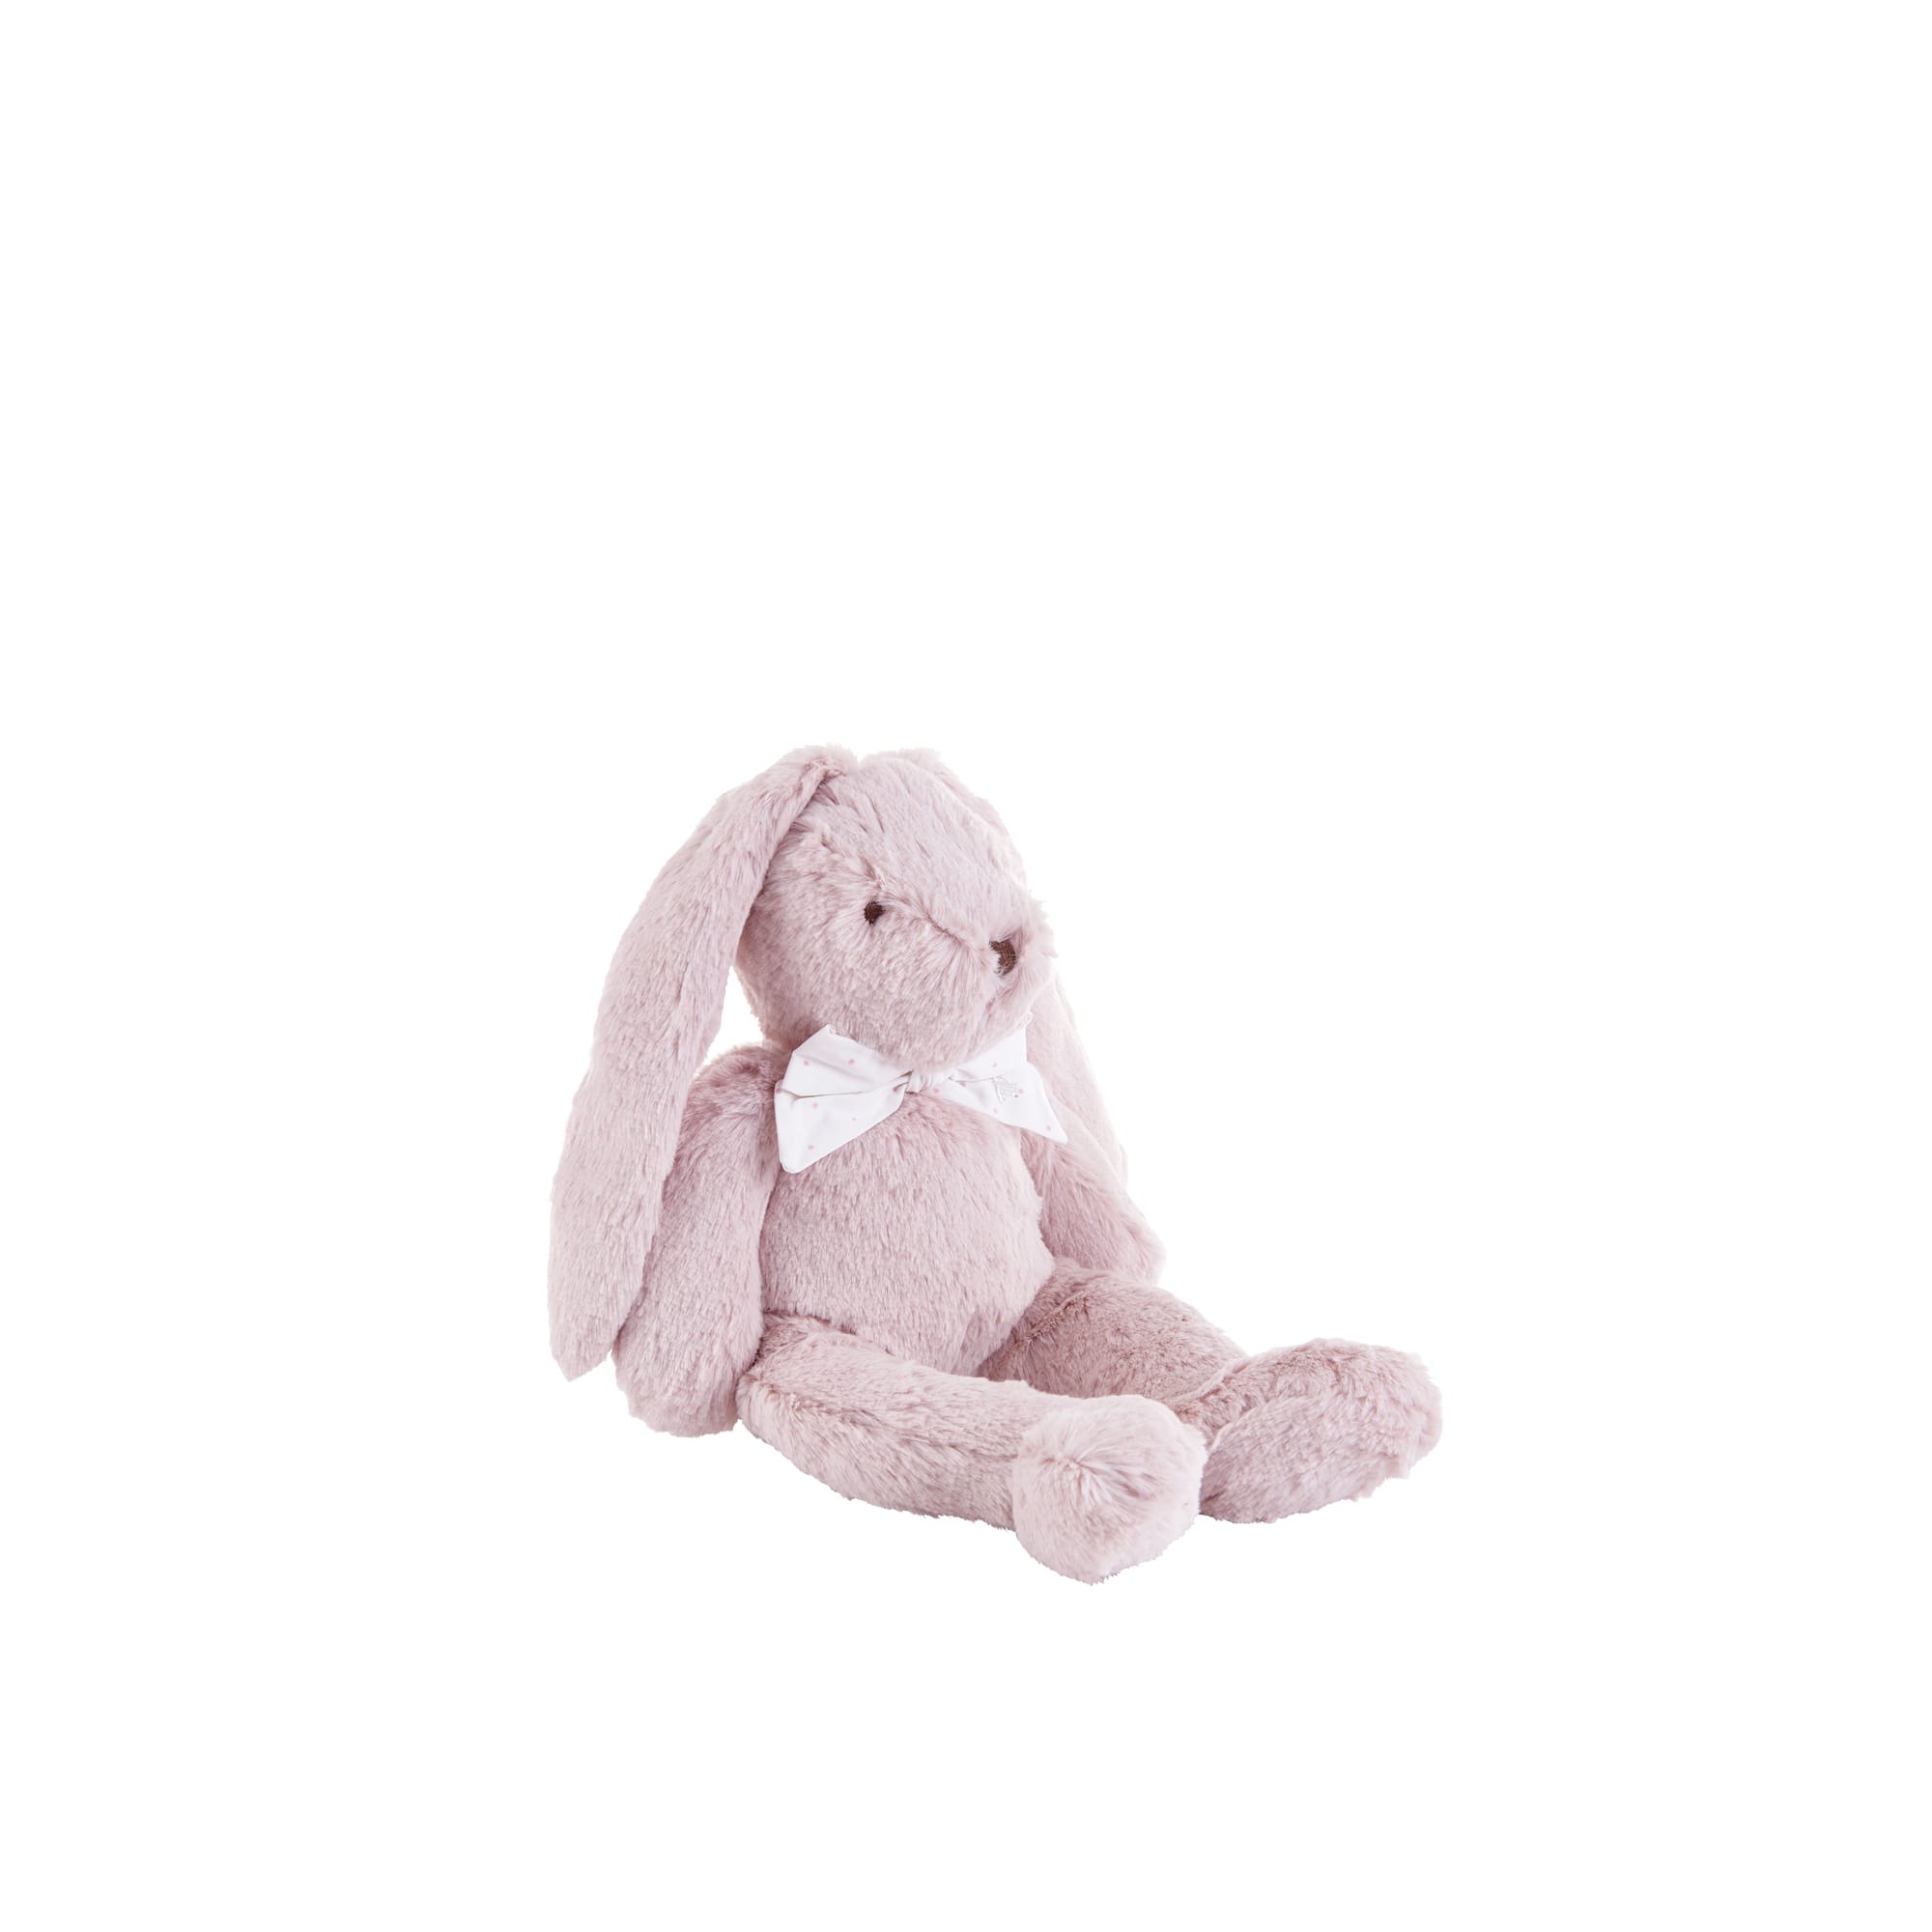 Theophile & Patachou Musical Rabbit Soft Toy - Cotton Pink